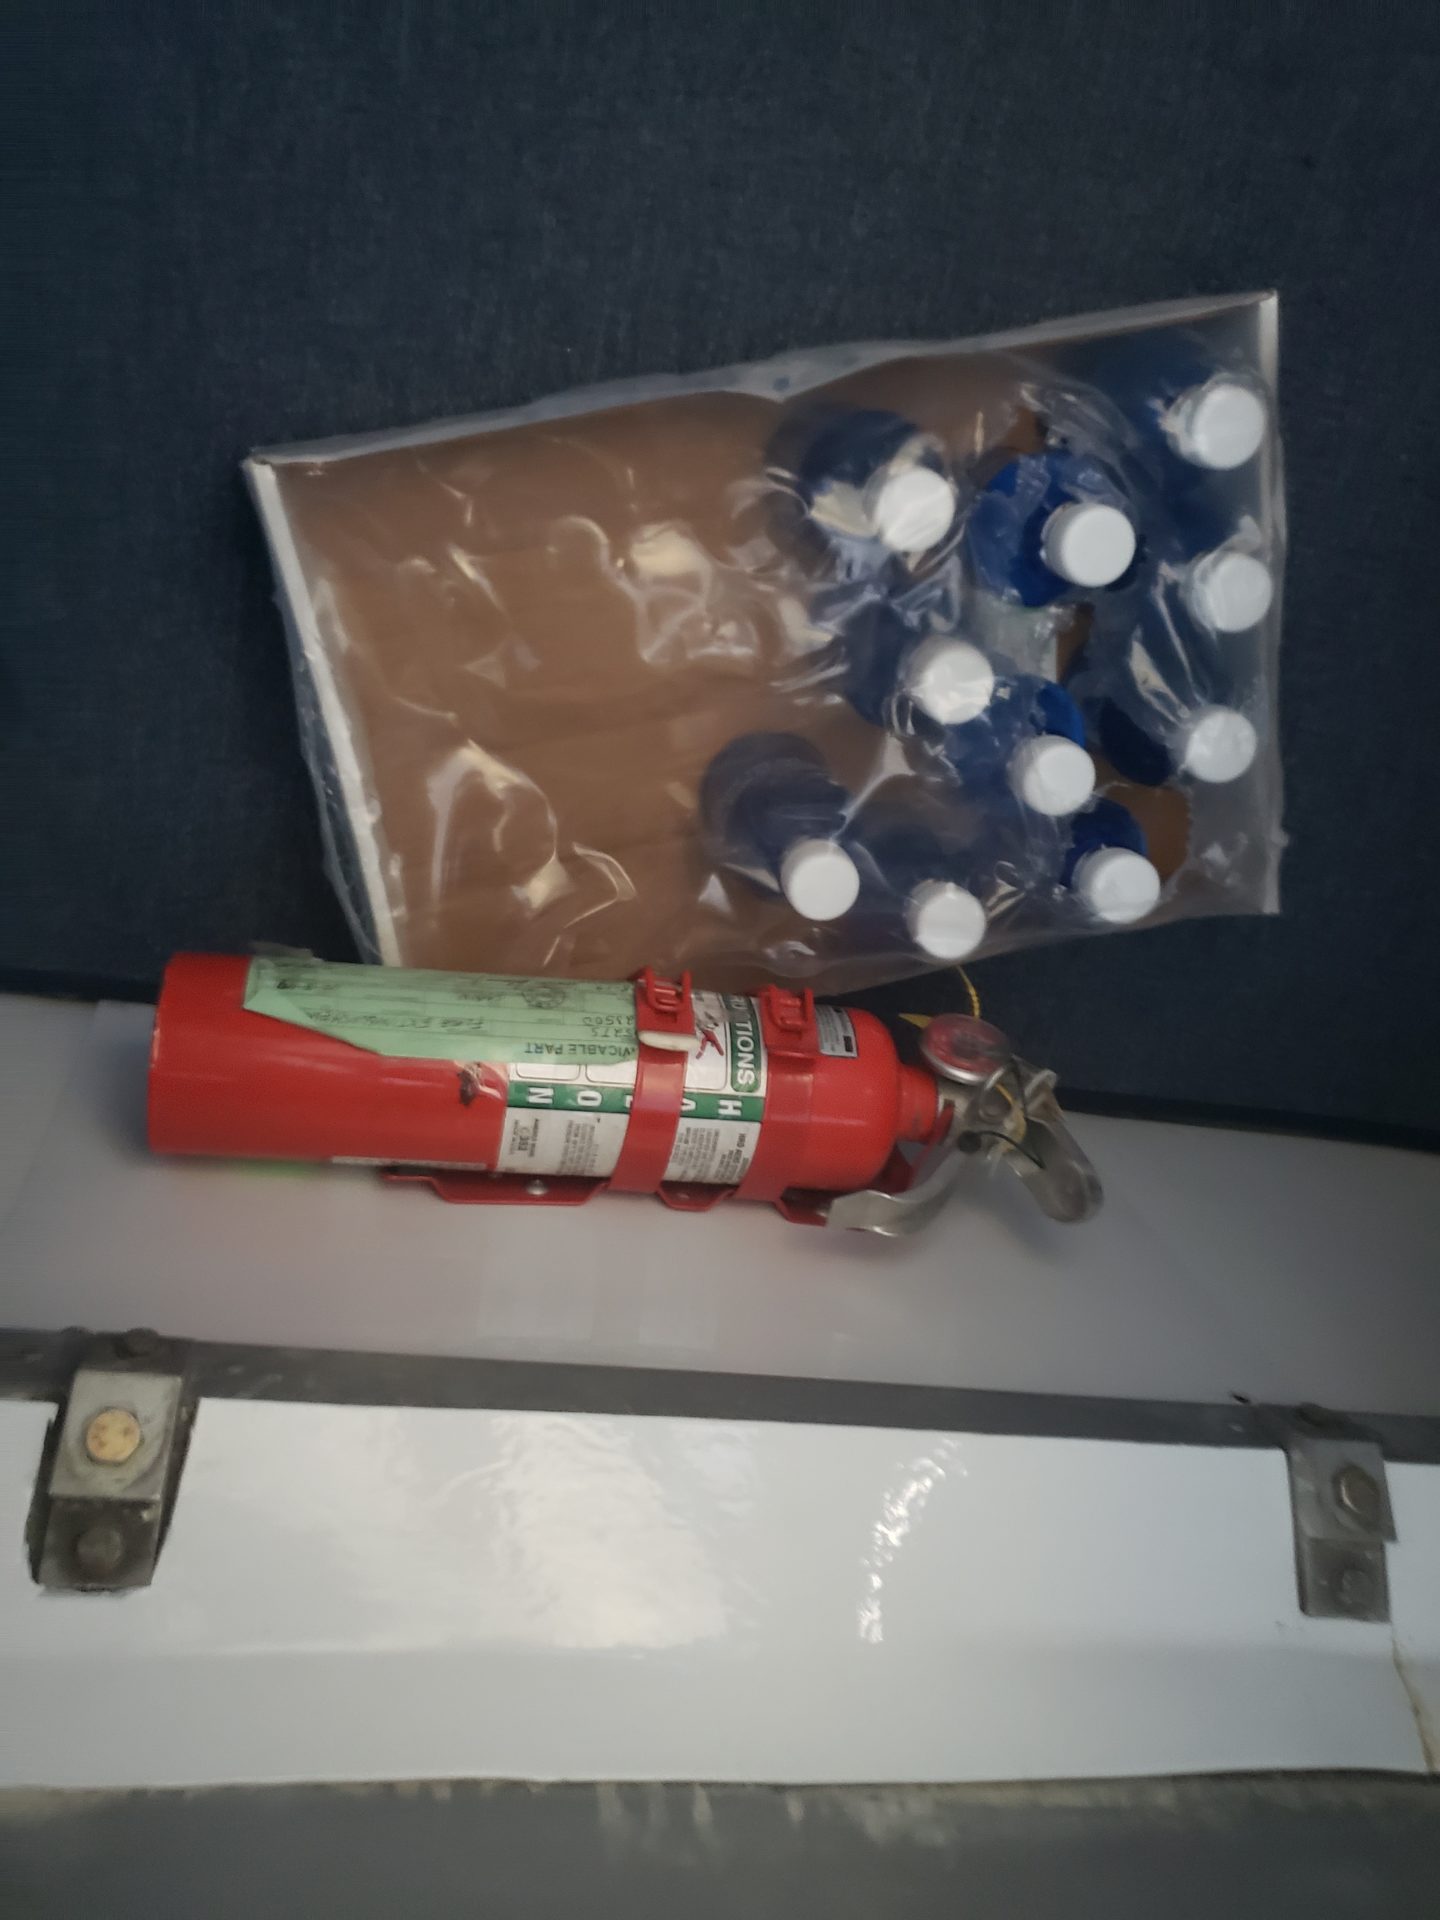 a fire extinguisher and a bag of blue and white bottles